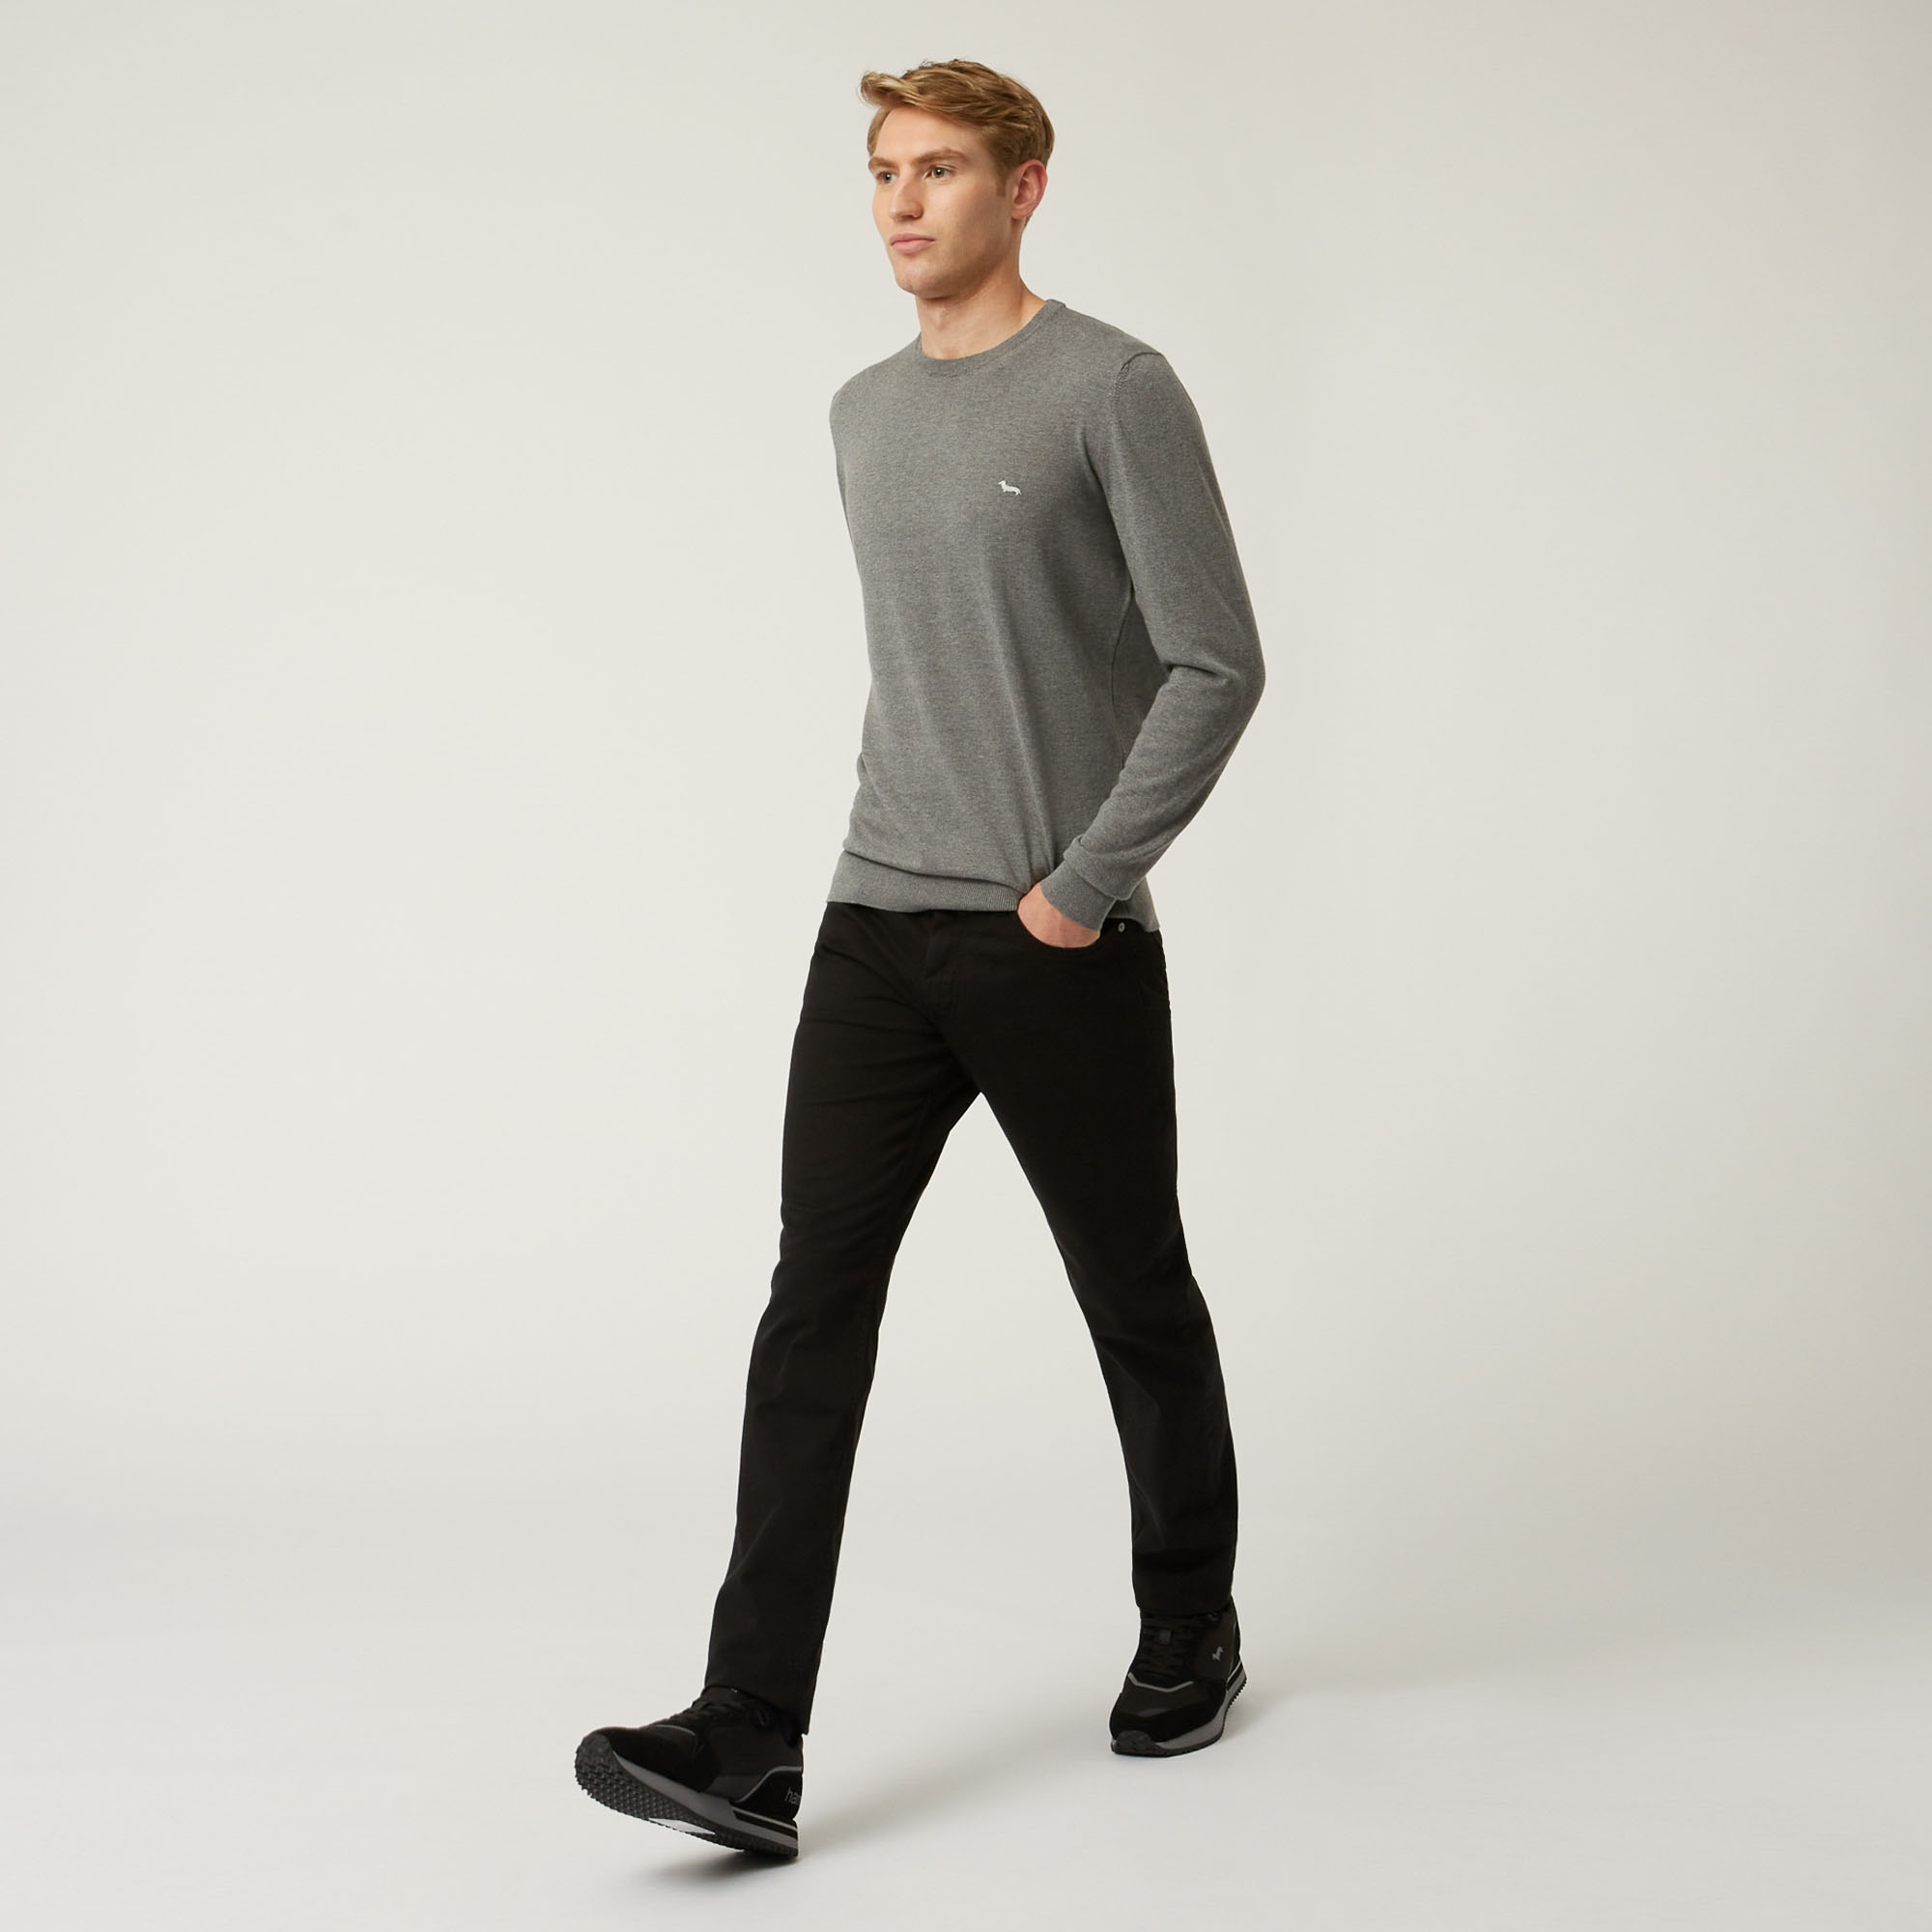 Essentials trousers in plain coloured cotton, Black, large image number 3